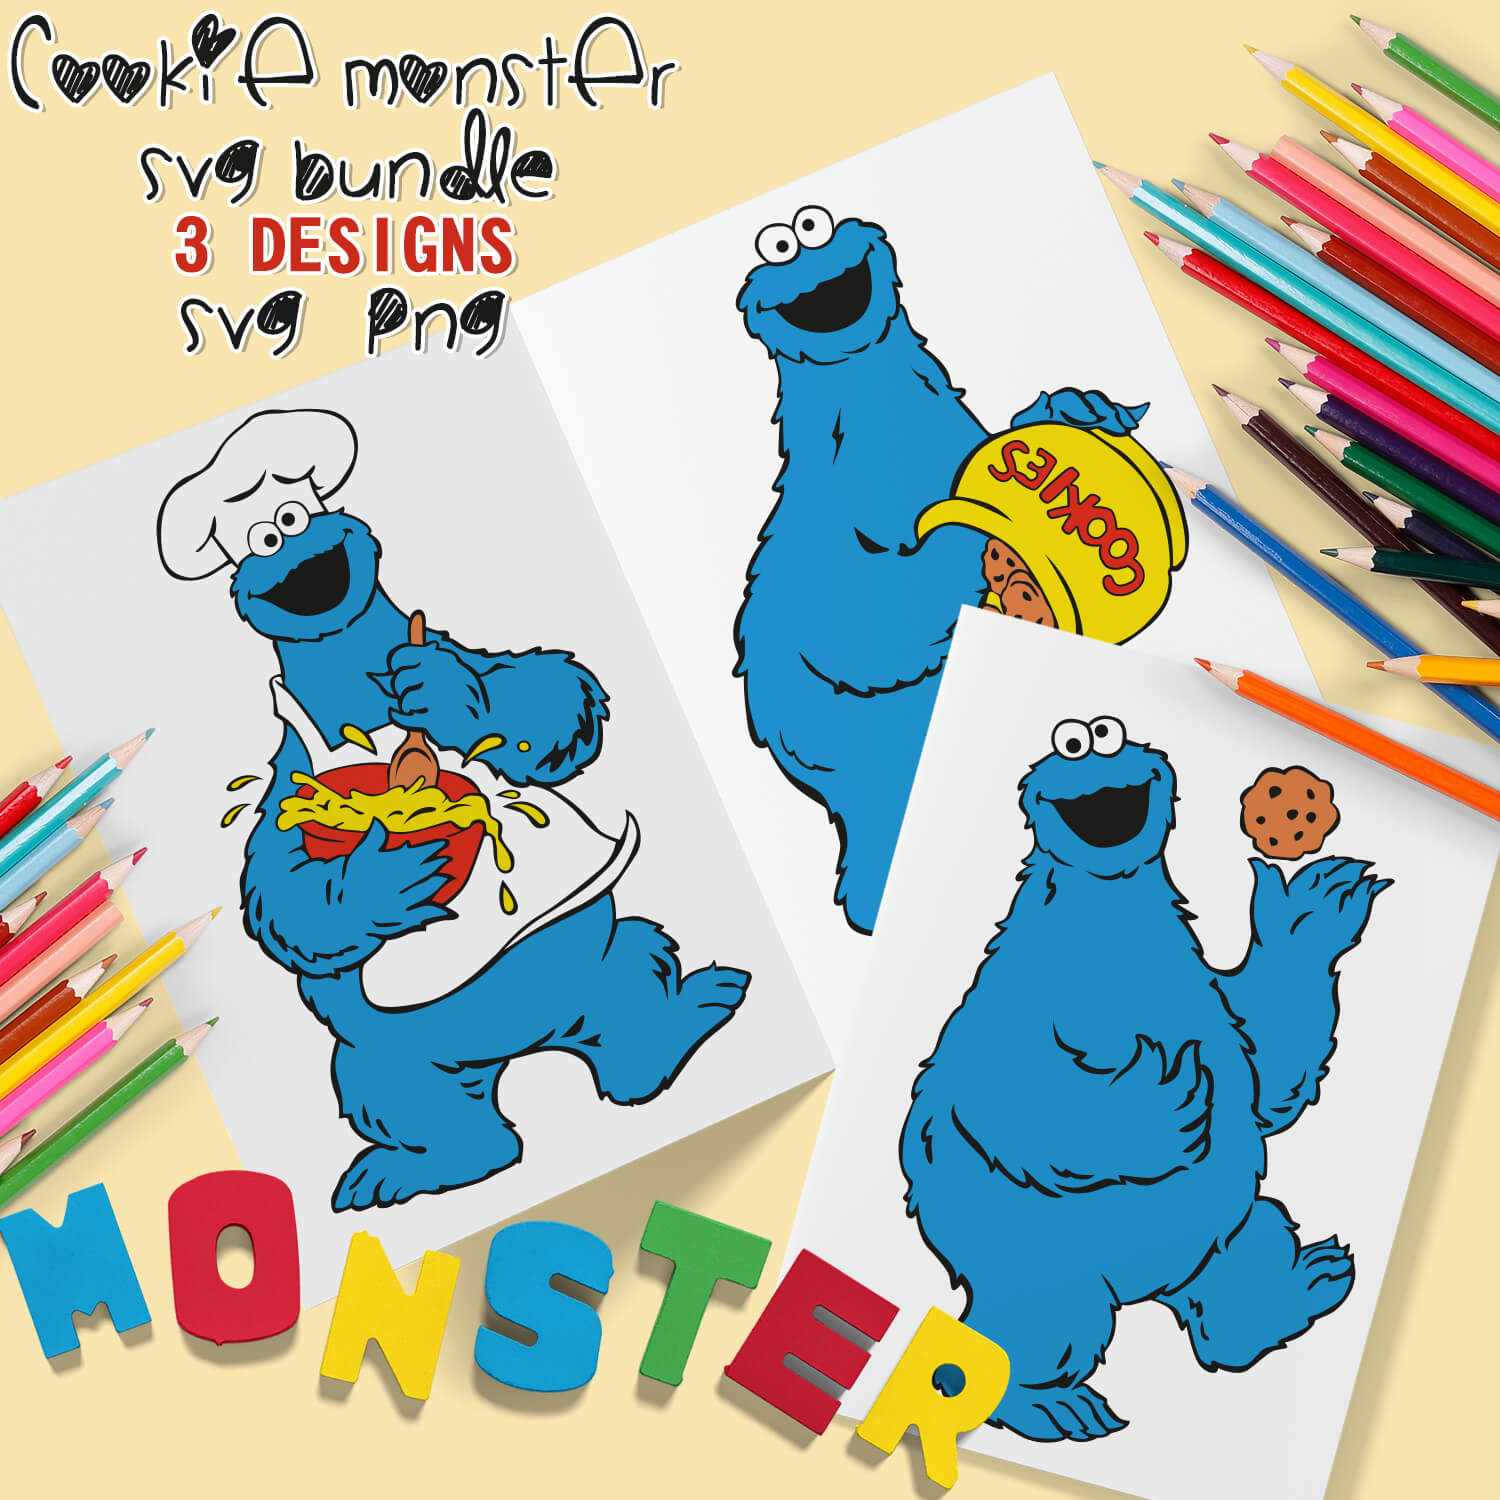 Preview Picture - Cookie Monster.